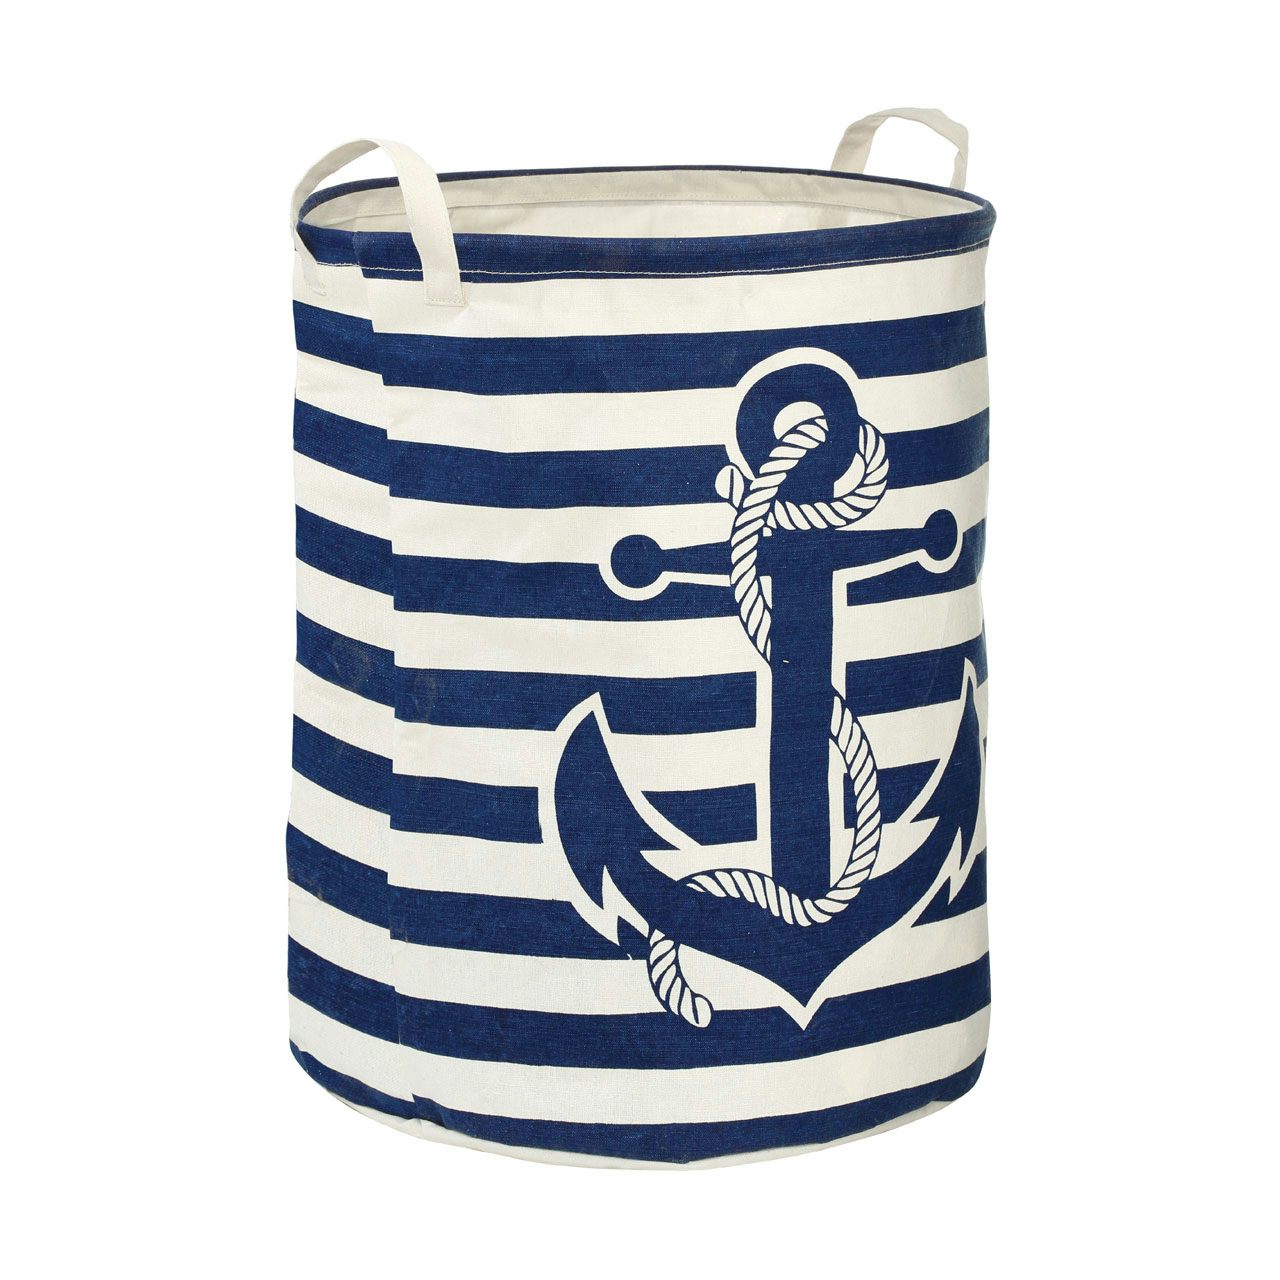 Accents Anchor navy and cream laundry hamper